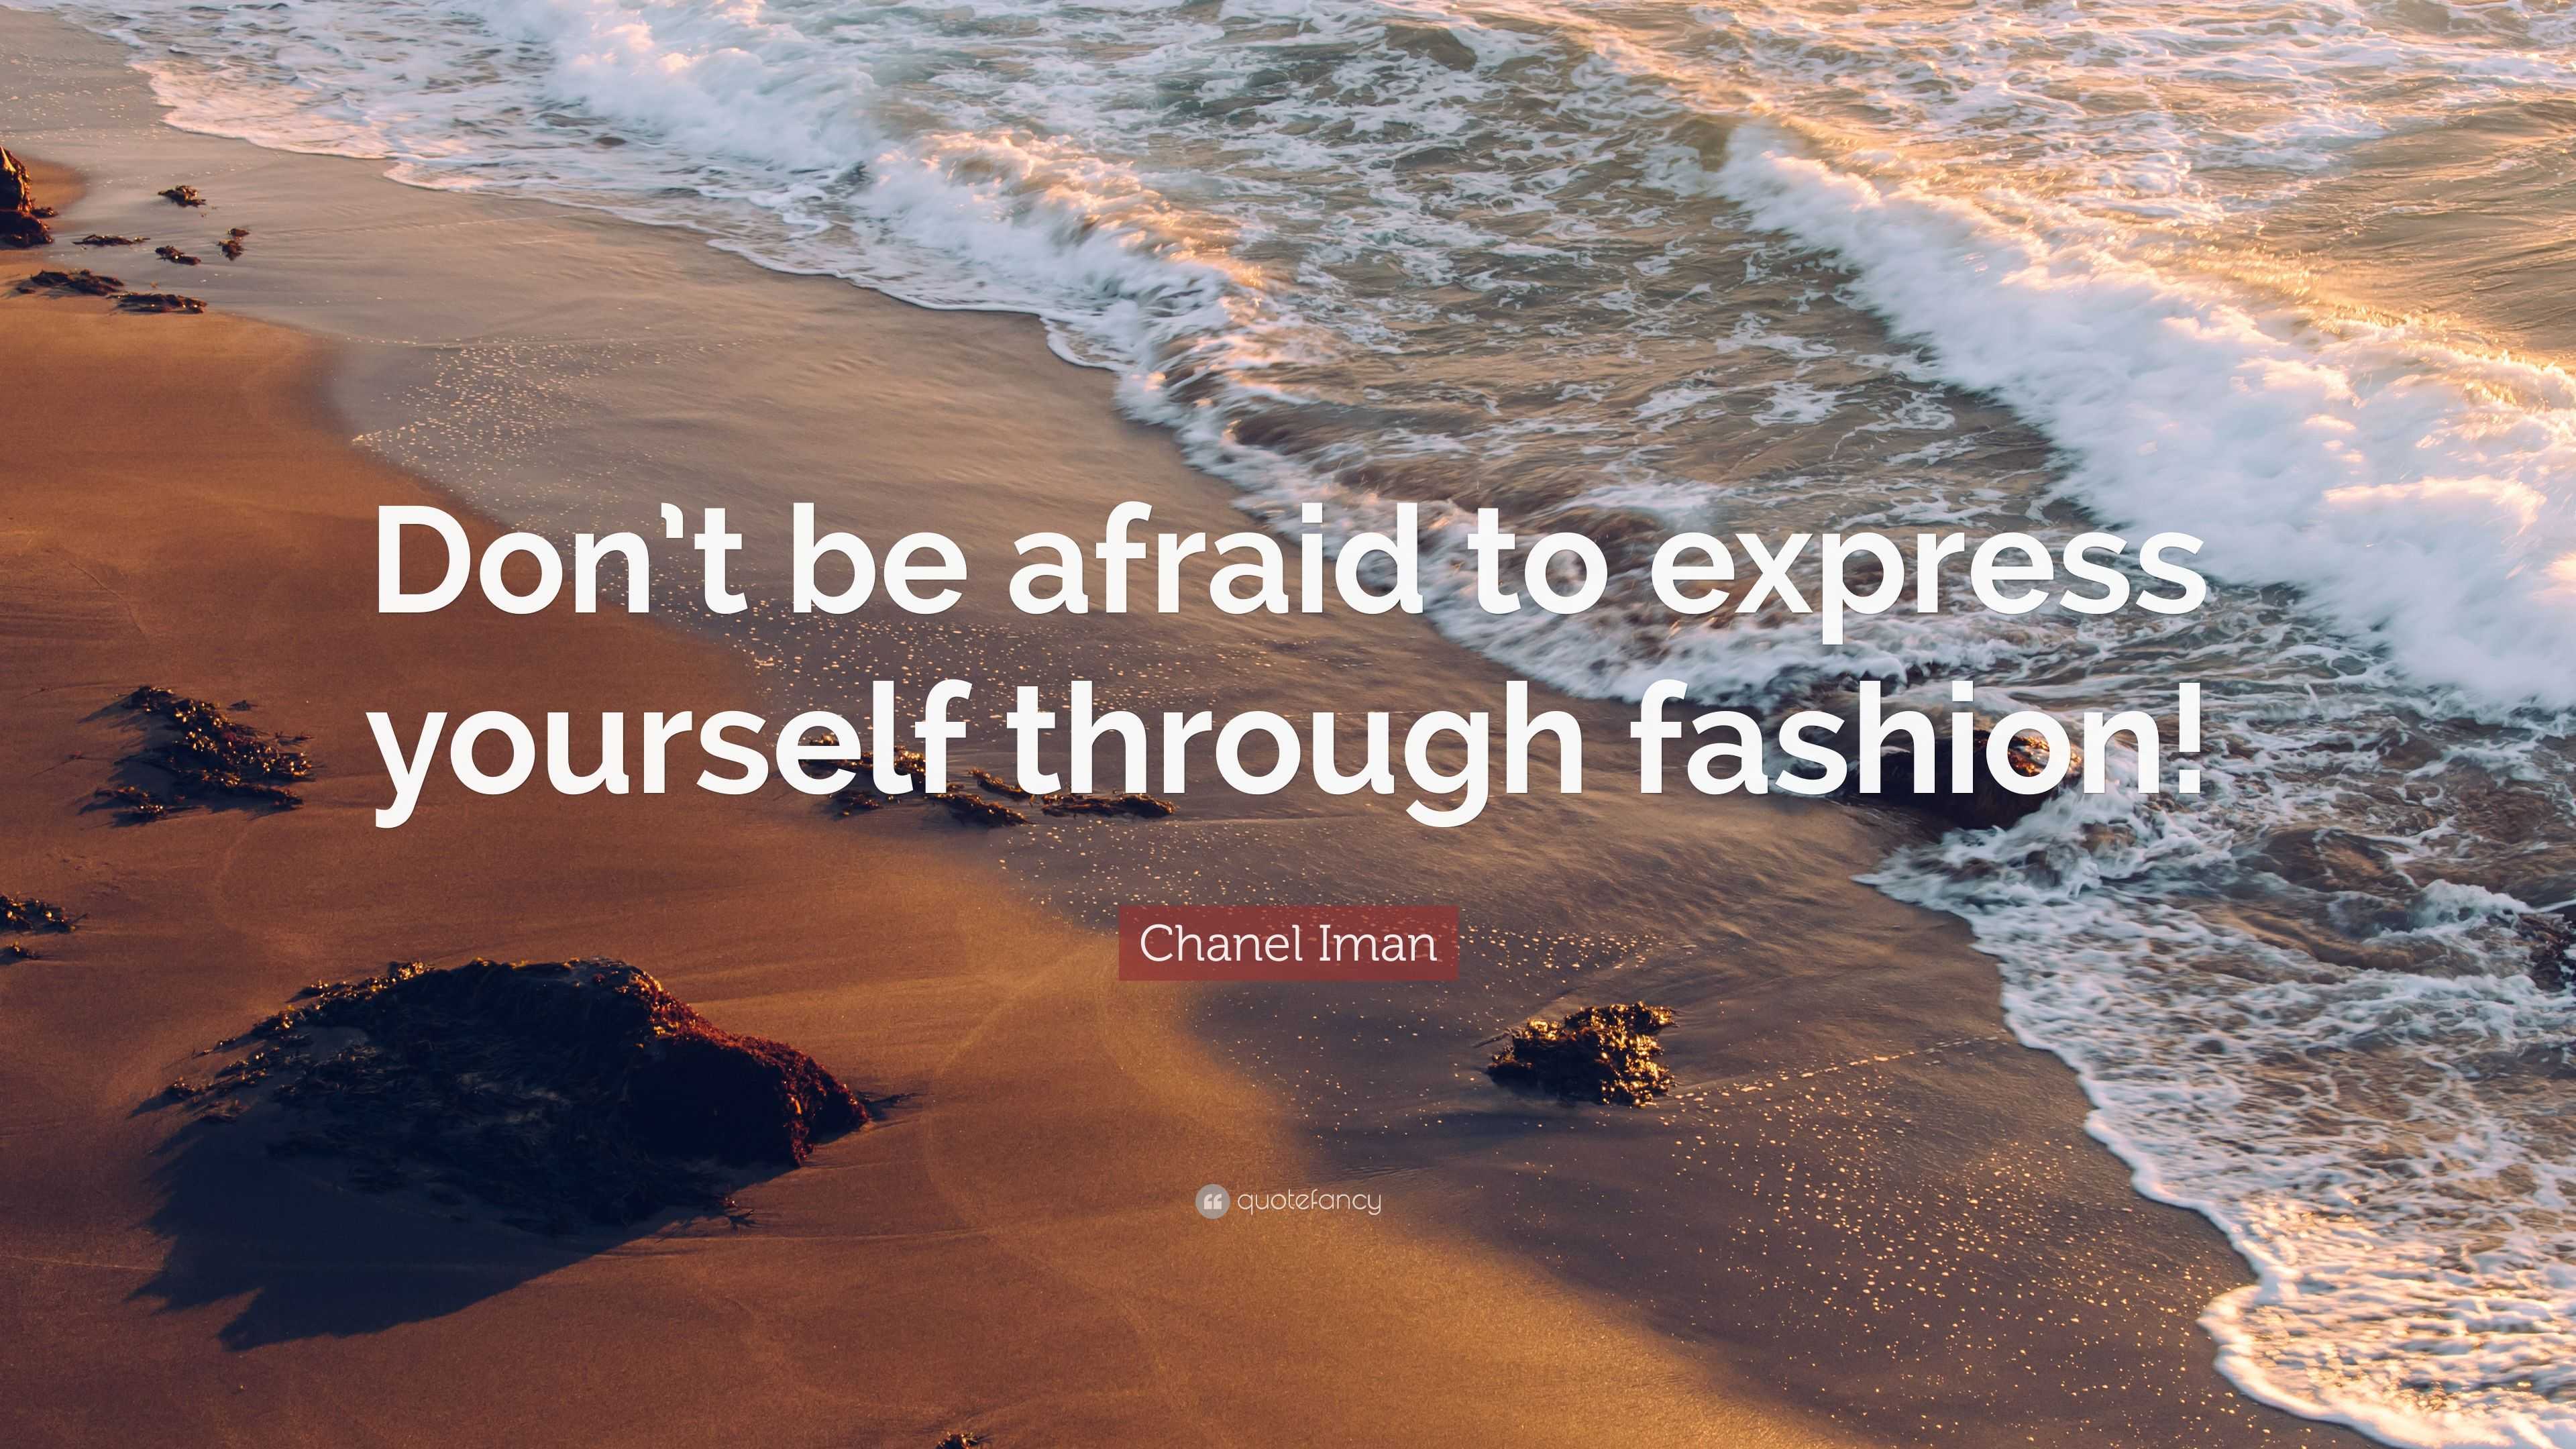 Chanel Iman Quote: "Don't be afraid to express yourself through fashion!" (9 wallpapers ...